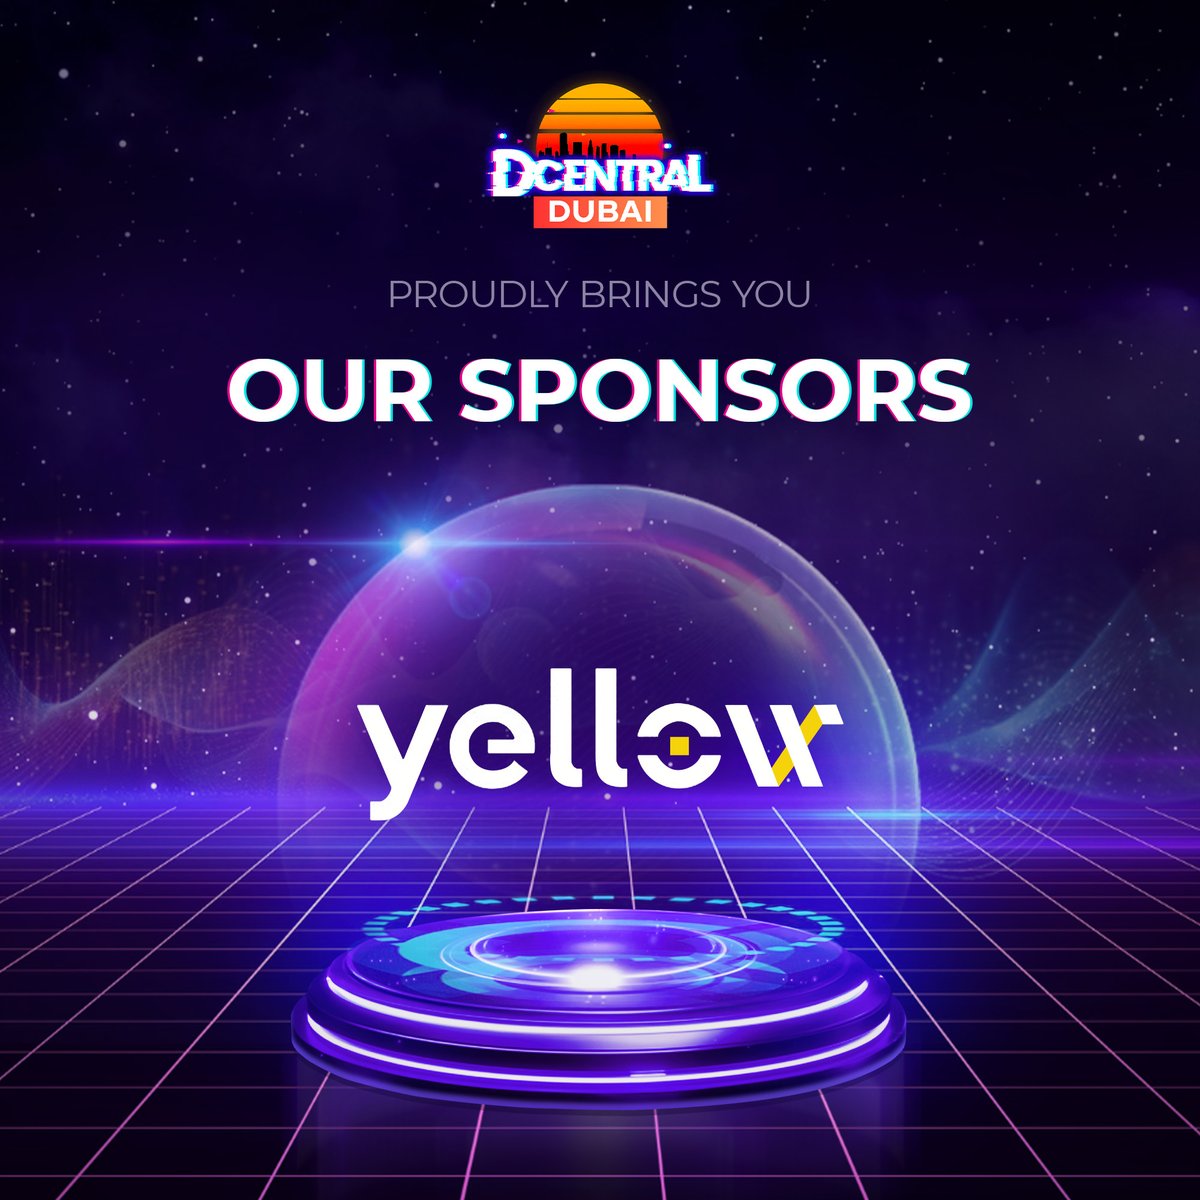 🔥We are thrilled to spotlight Yellow Capital as the sponsor of our upcoming events in Dubai! A special thanks to @yellow Yellow Capital, a leading venture capital and crypto market maker firm focused on supporting crypto projects. Join our DCENTRRAL DUBAI EVENTS: